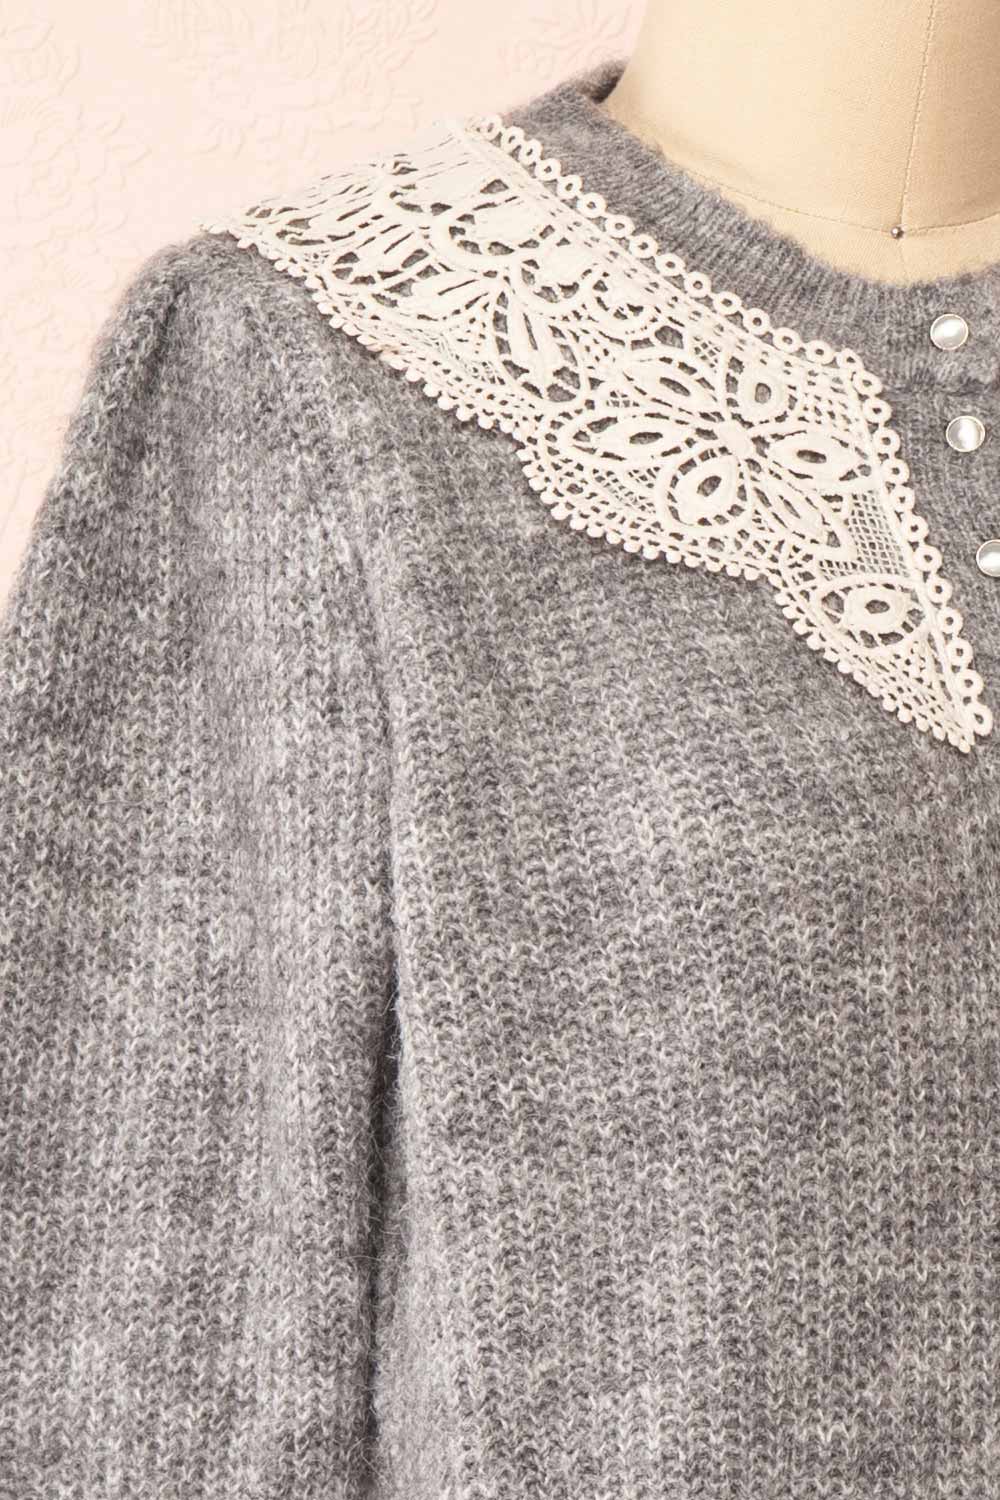 Reagan Grey Buttoned Collar Sweater w/ Lace | Boutique 1861 side close-up